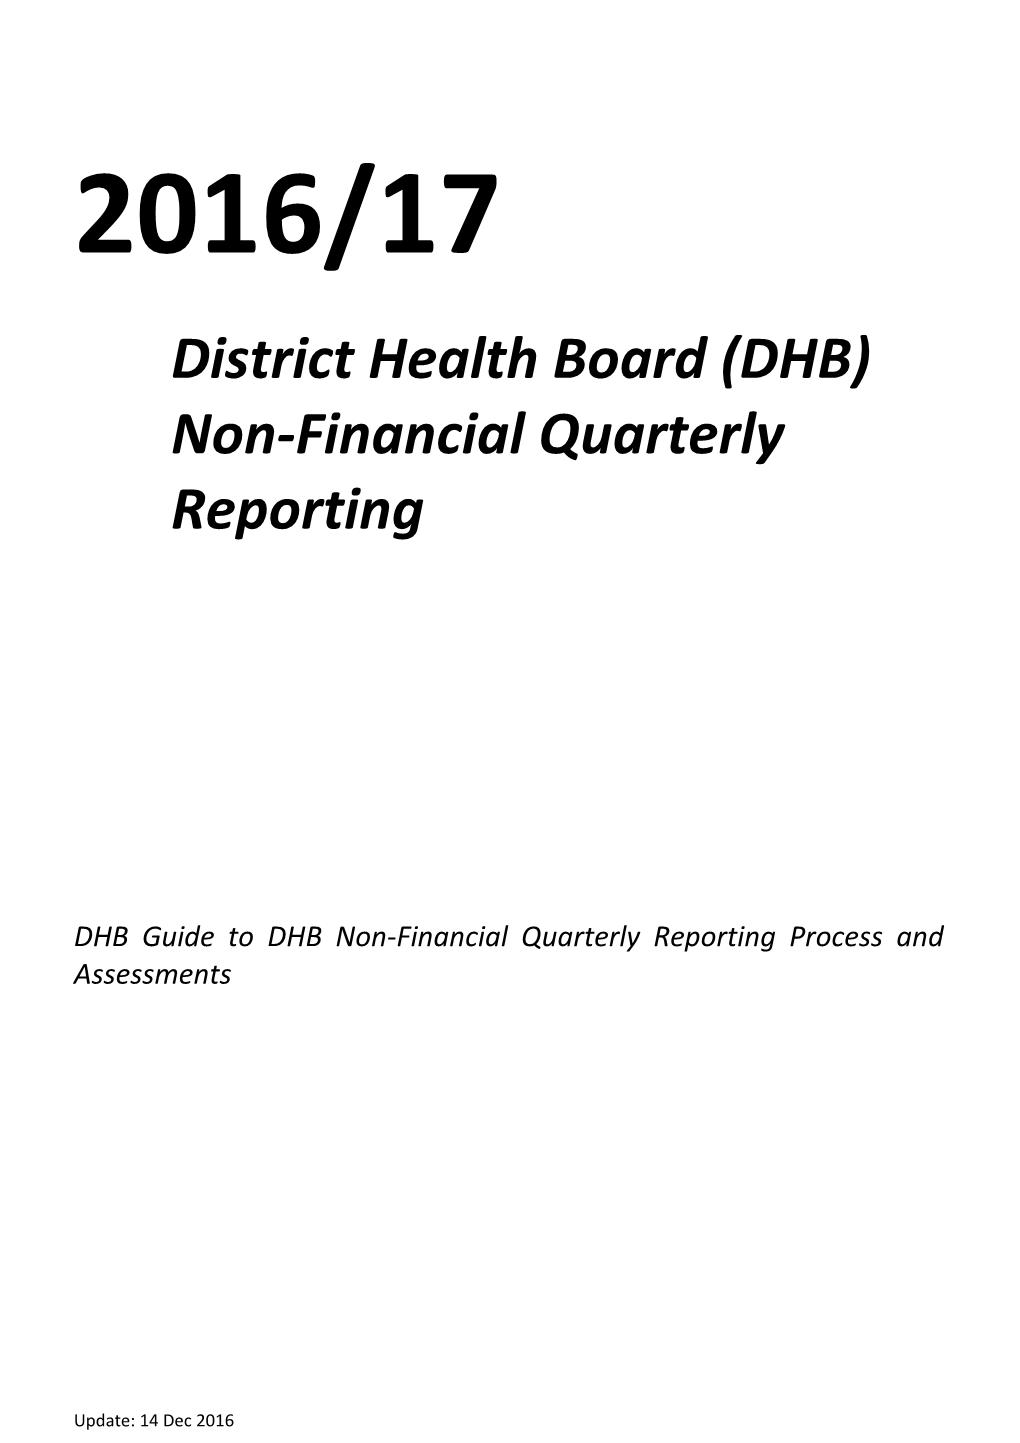 DHB Non-Financial Quarterly Reporting for 2010/11